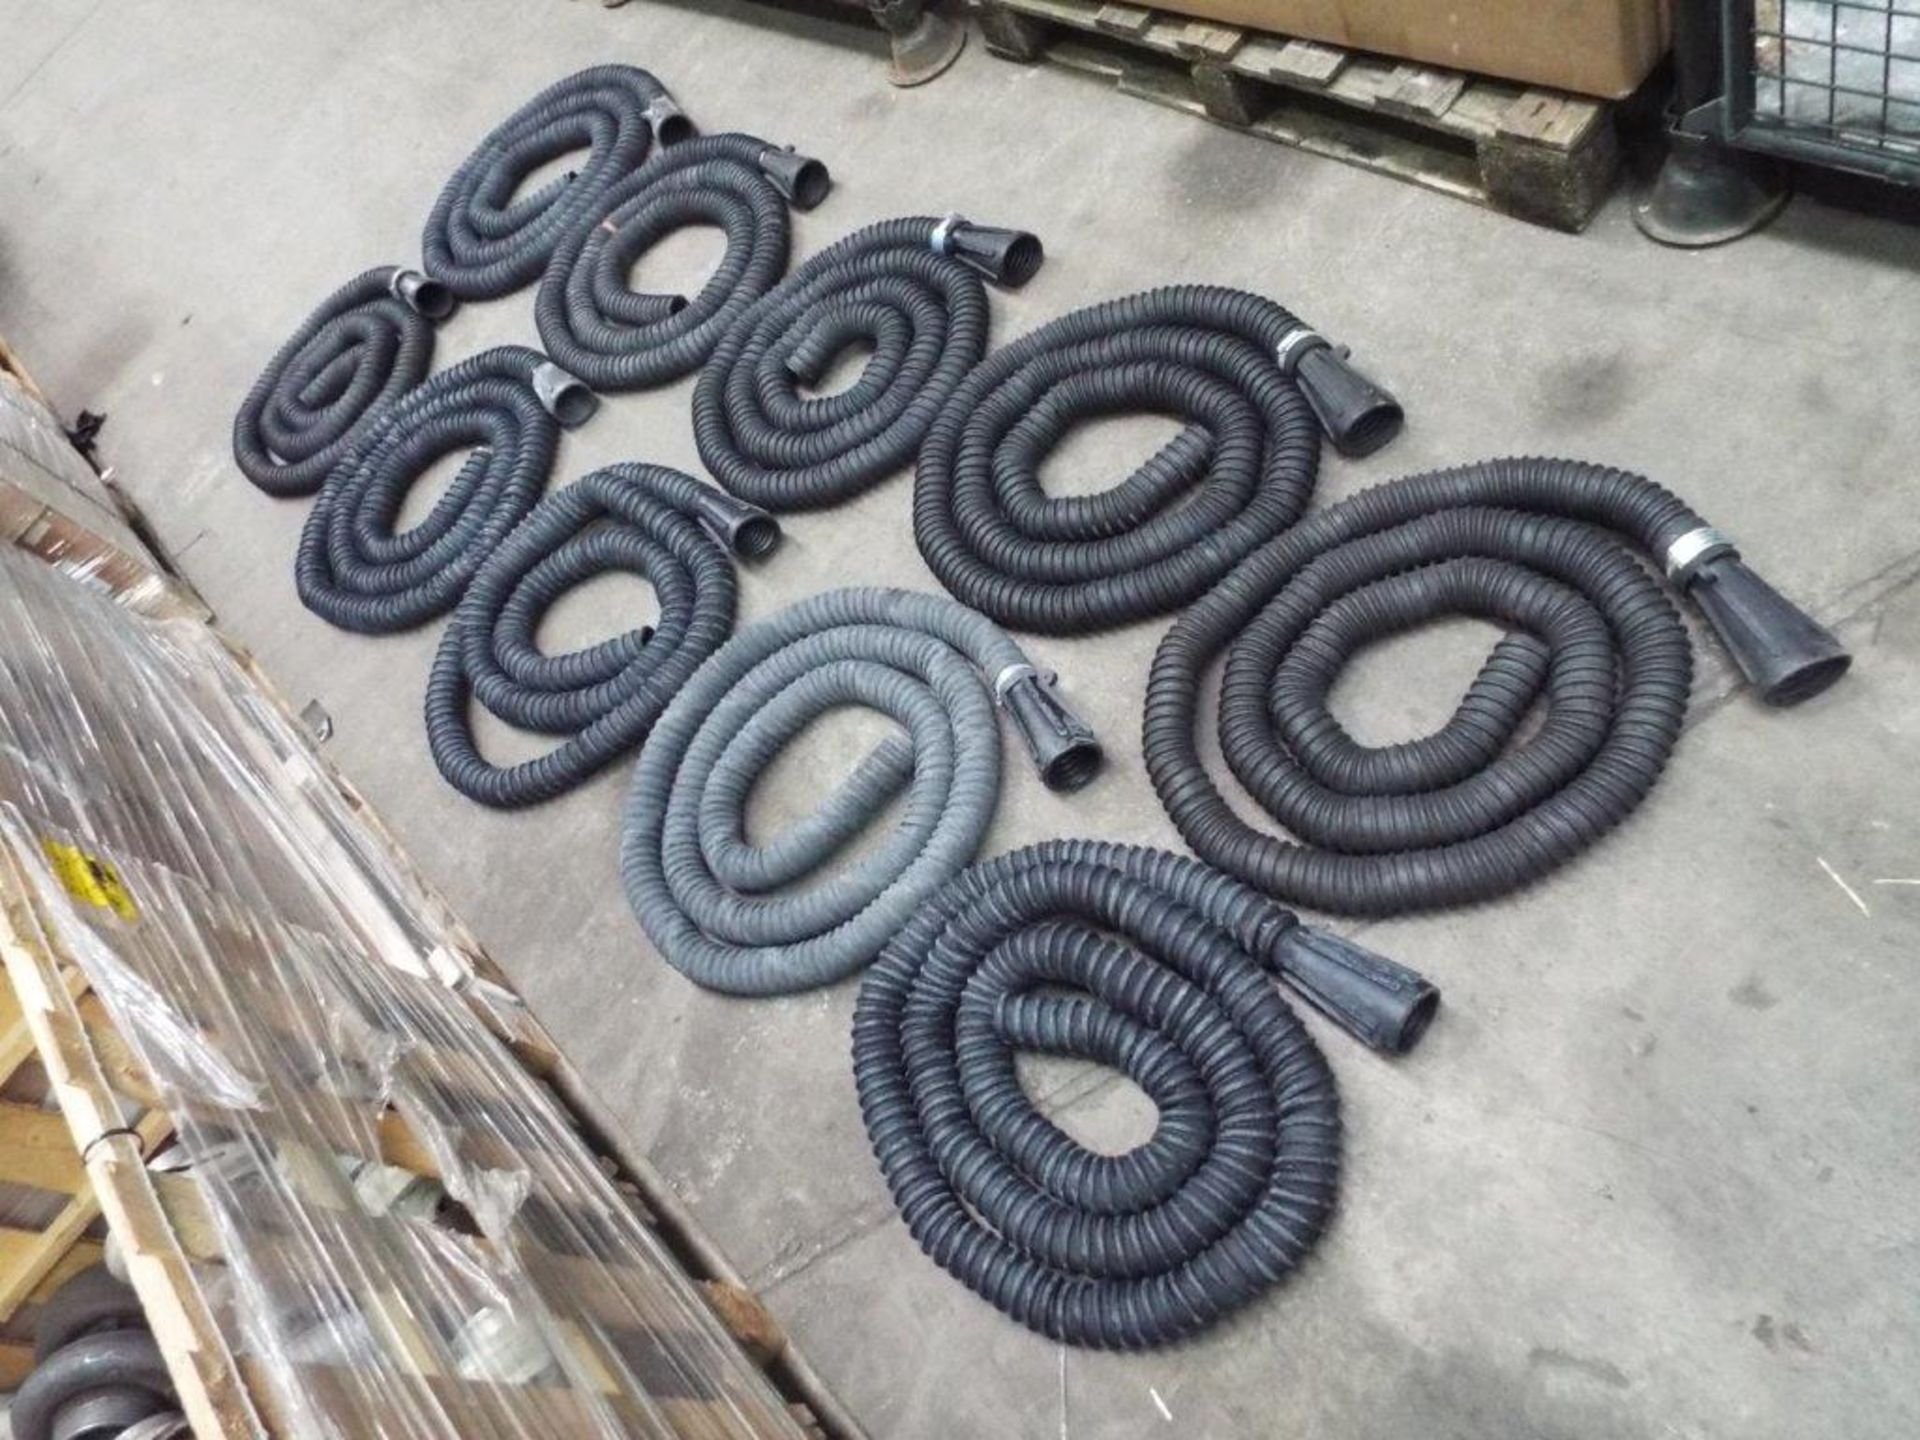 10 x Exhaust Disposal Hoses